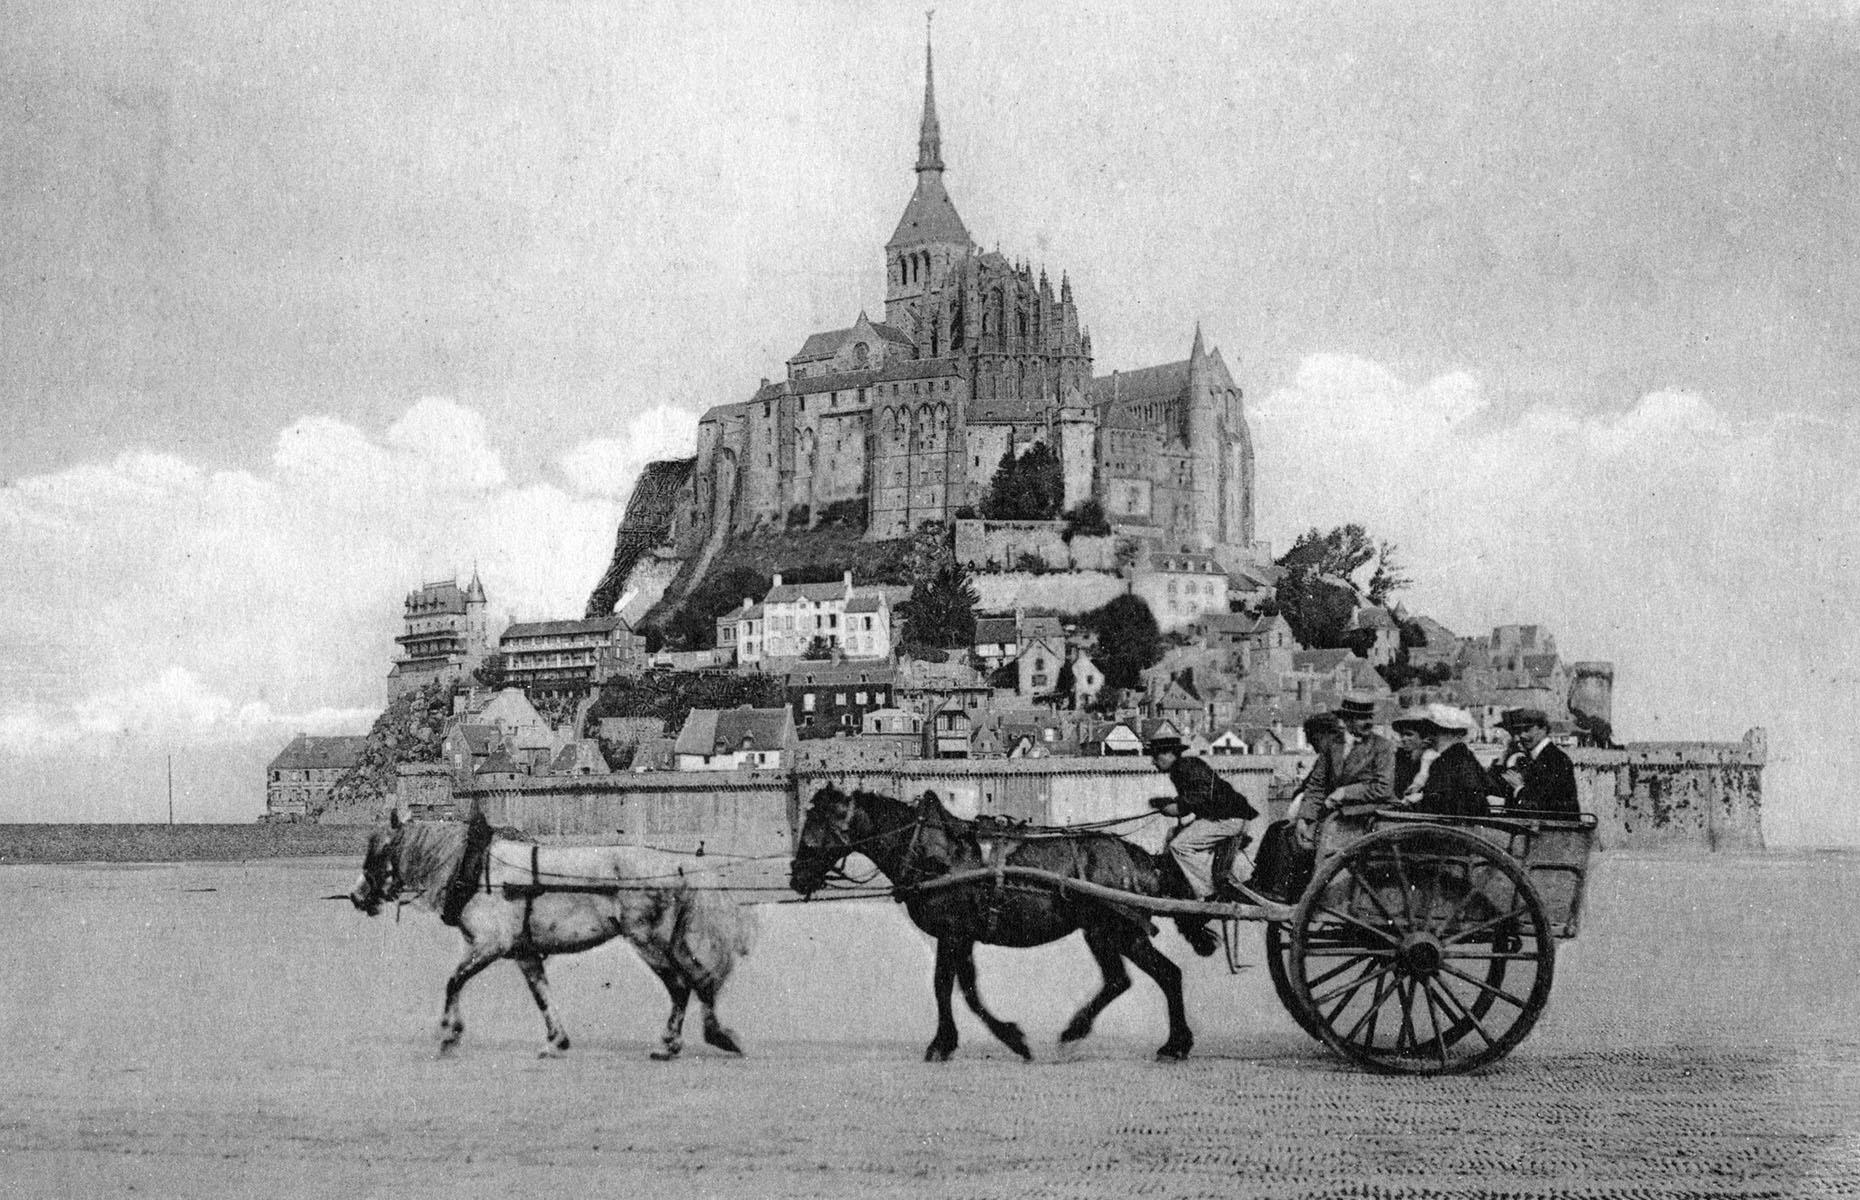 <p>Those who have queued for hours to visit Mont St Michel in sweltering summer heat would have given anything for a joyful scene such as this, taken on the beach in front of the medieval abbey at the turn of the century. These days, that same stretch of sand sees up to 2.5 million visitors a year line up to shuffle through its narrow lanes and inch along its ramparts. Such is the overcrowding that in 2023, the French government actively campaigned for tourists to visit other parts of the country instead.</p>